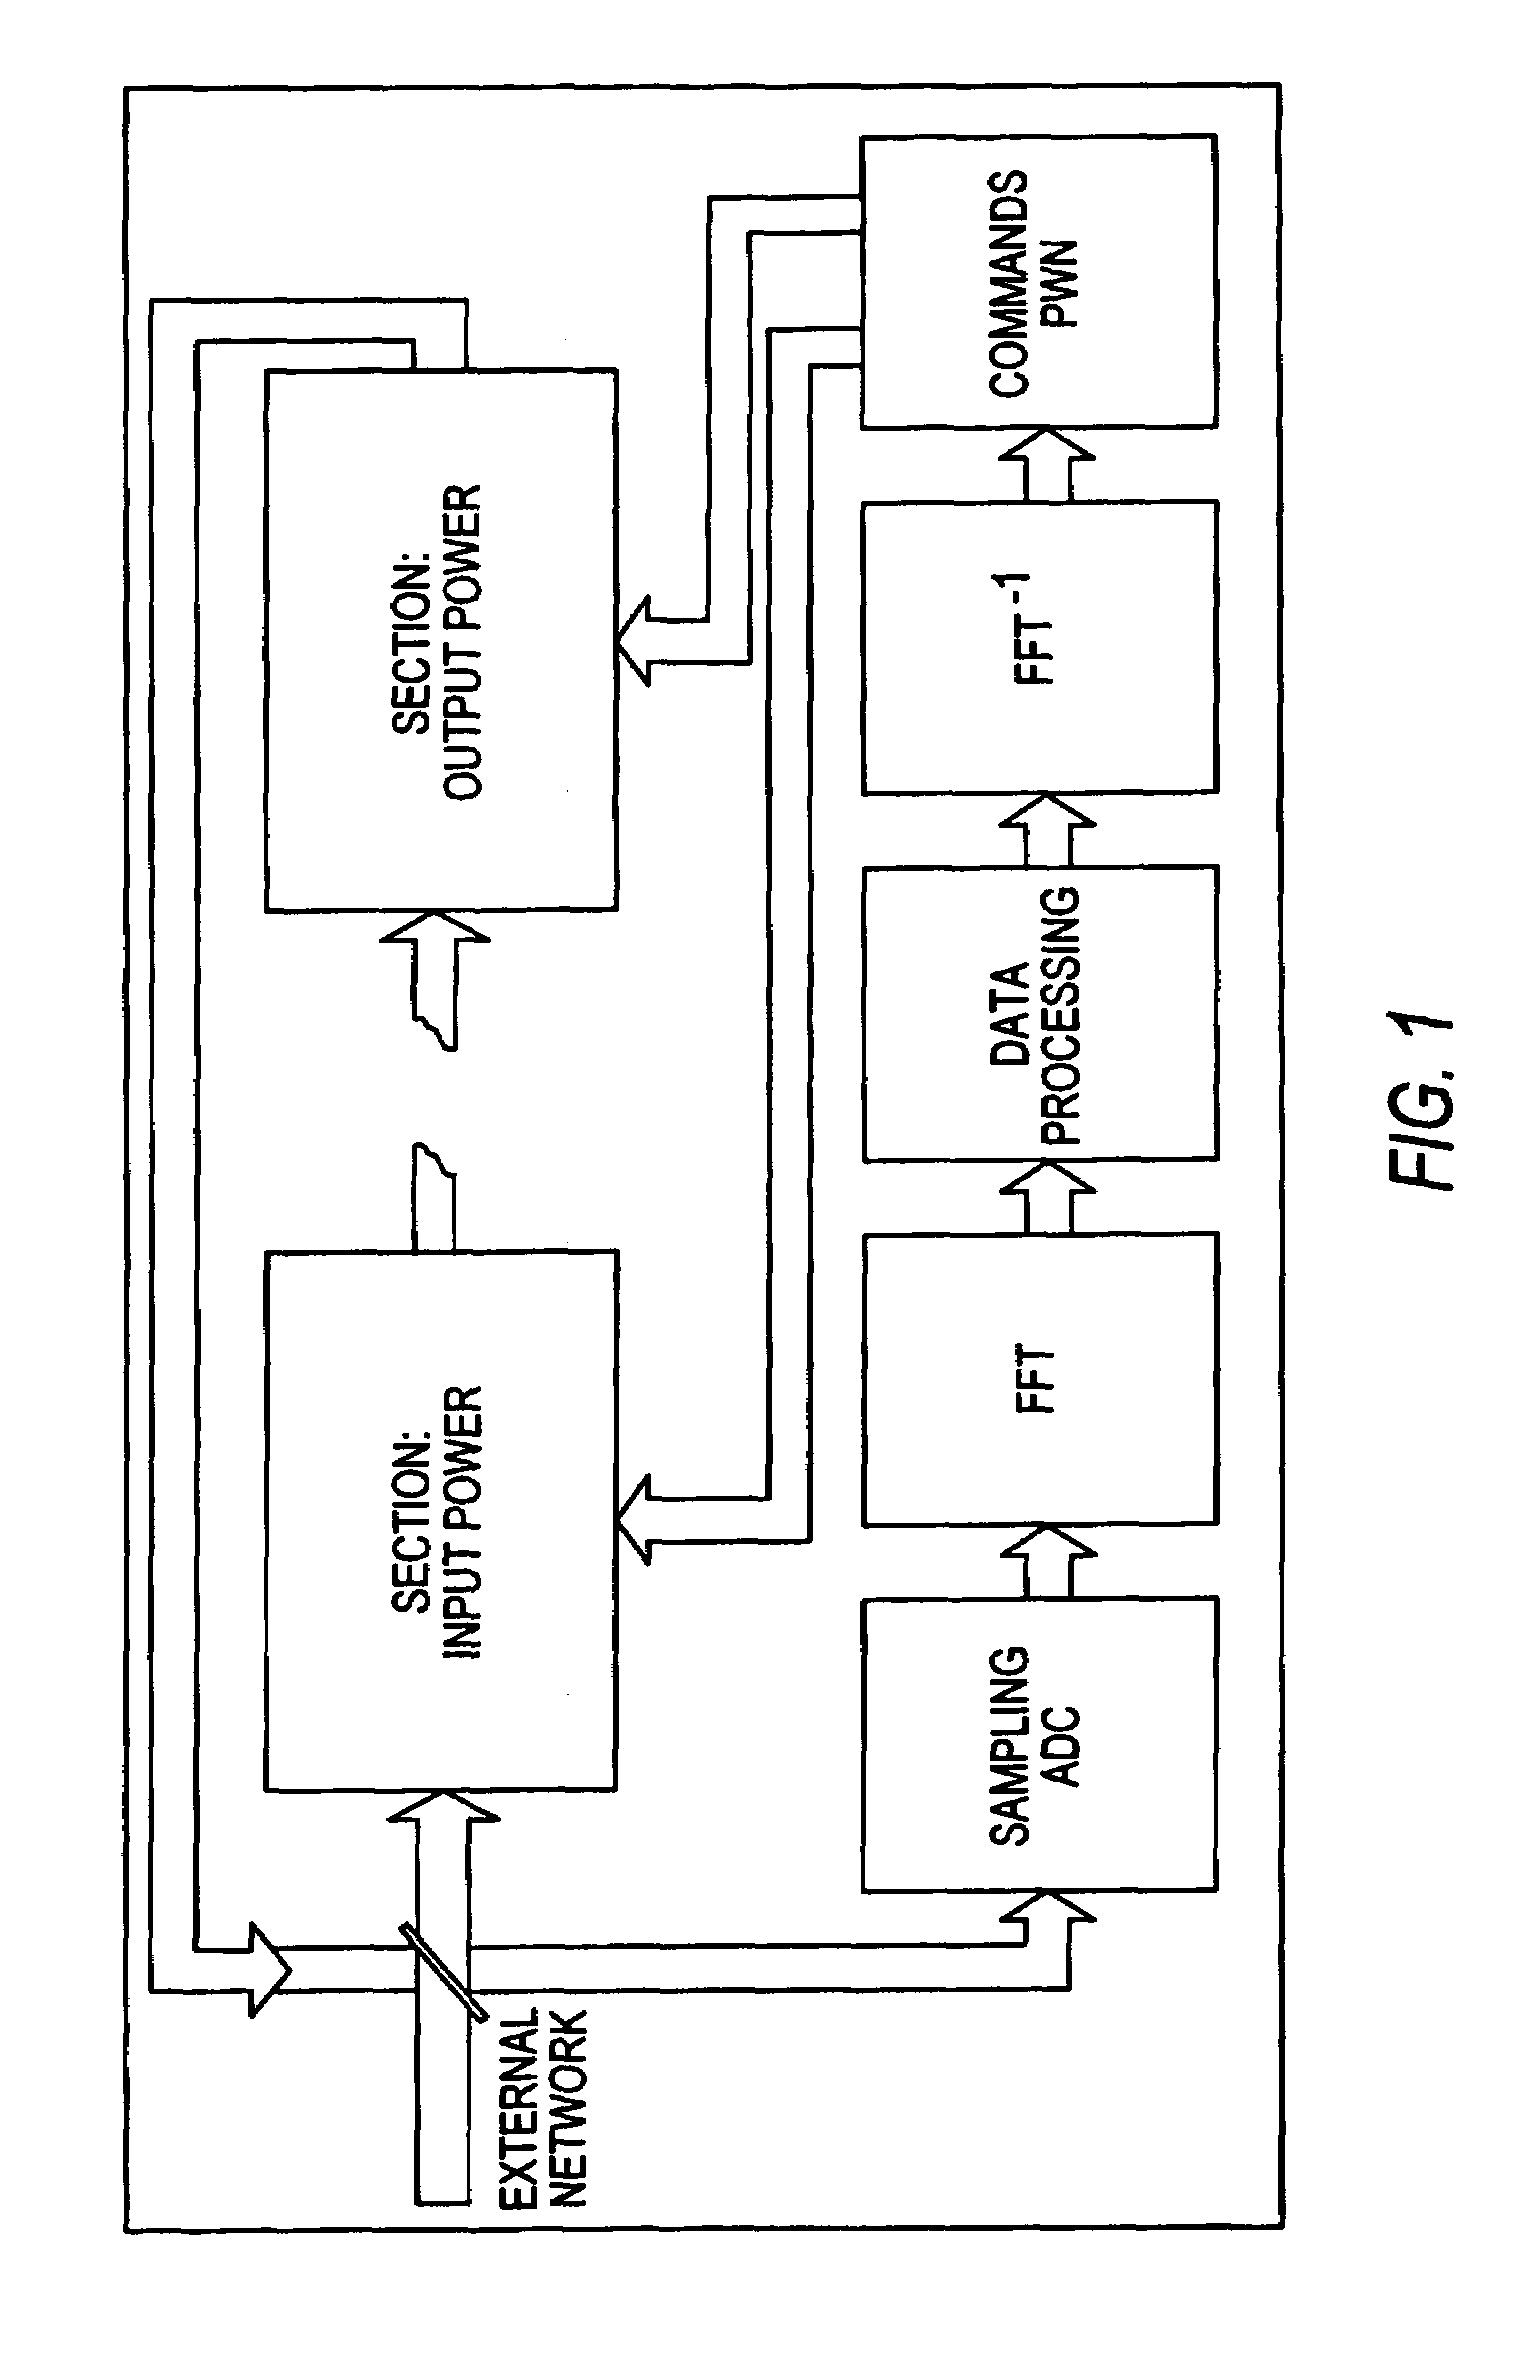 System for correcting power factor and harmonics present on an electroduct in an active way and with high-dynamics